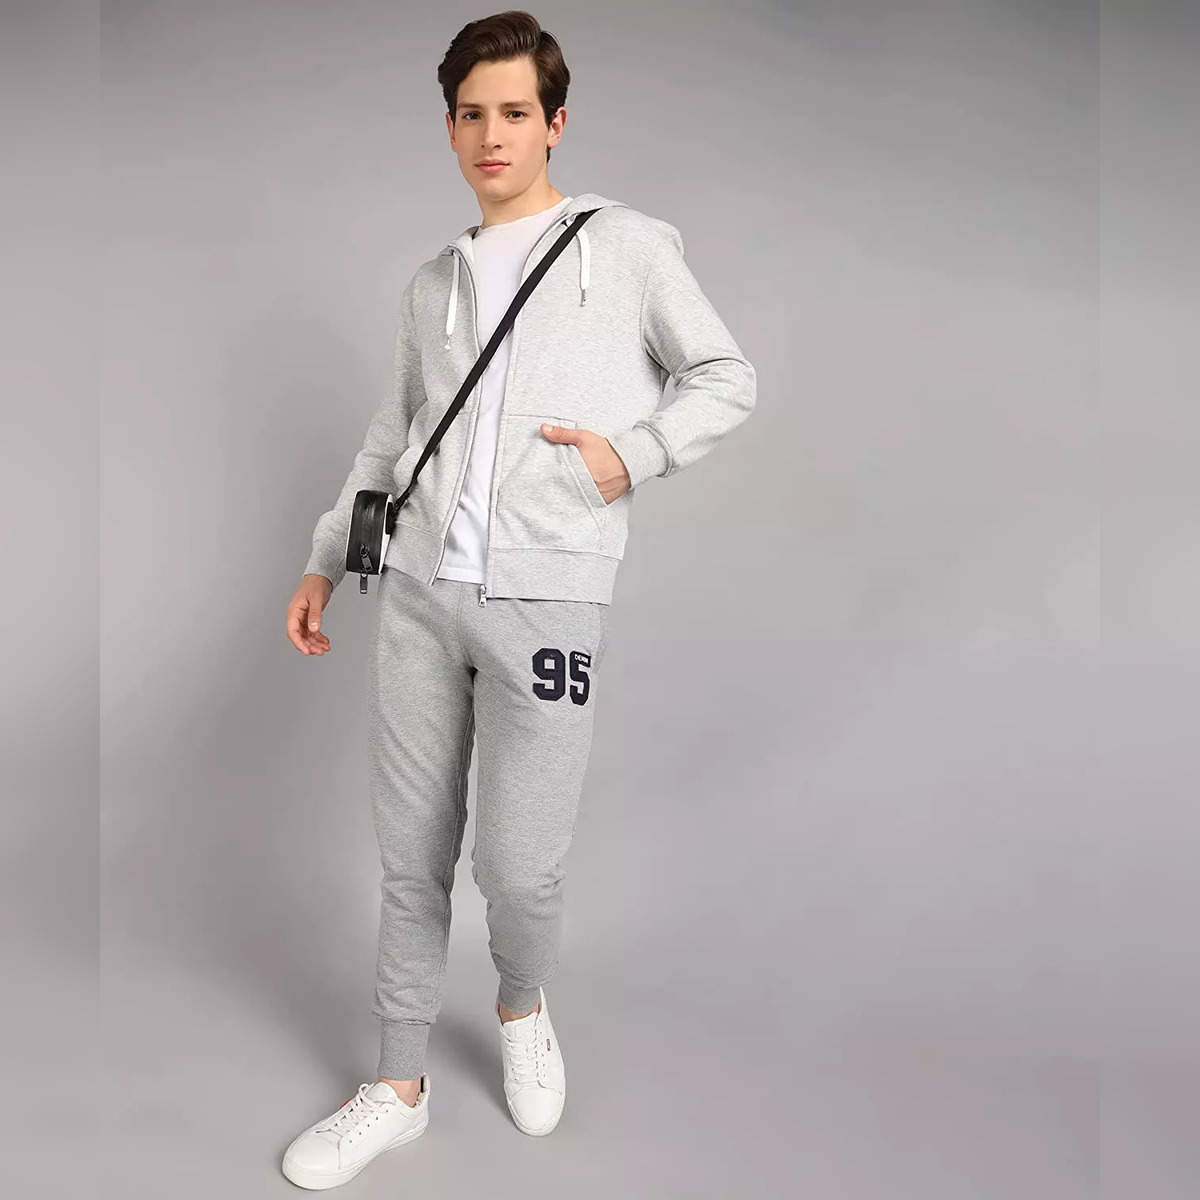 best joggers for men in india